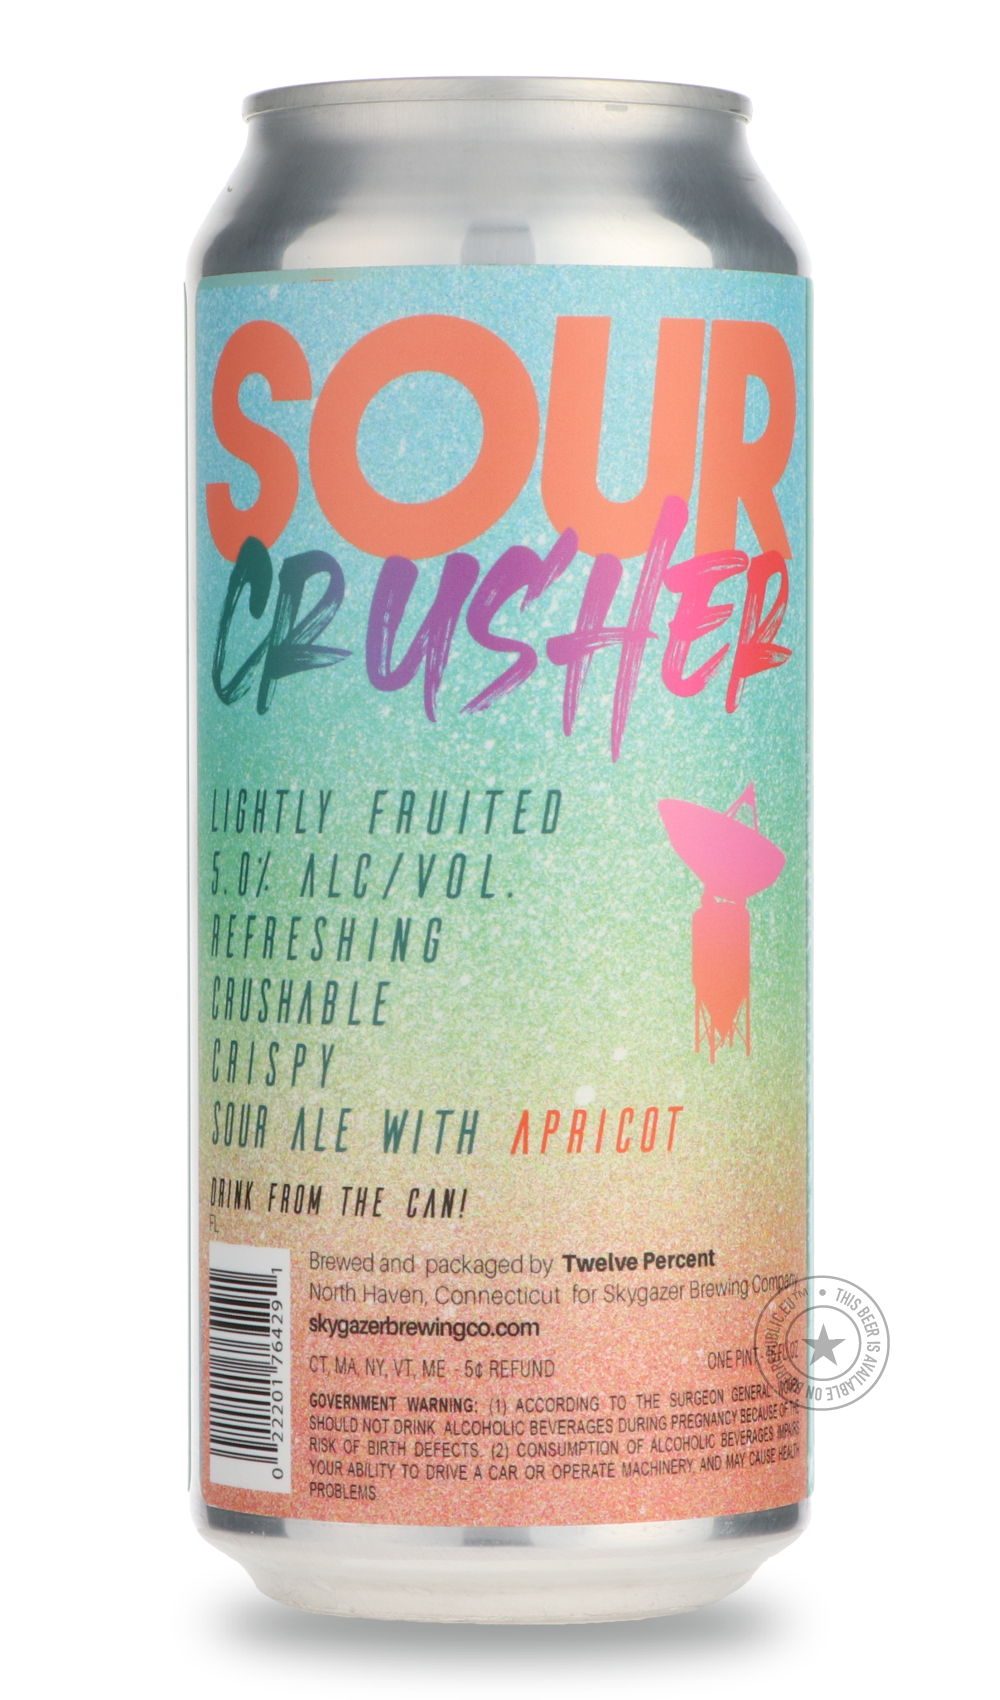 -Skygazer- Sour Crusher - Apricot-Sour / Wild & Fruity- Only @ Beer Republic - The best online beer store for American & Canadian craft beer - Buy beer online from the USA and Canada - Bier online kopen - Amerikaans bier kopen - Craft beer store - Craft beer kopen - Amerikanisch bier kaufen - Bier online kaufen - Acheter biere online - IPA - Stout - Porter - New England IPA - Hazy IPA - Imperial Stout - Barrel Aged - Barrel Aged Imperial Stout - Brown - Dark beer - Blond - Blonde - Pilsner - Lager - Wheat -